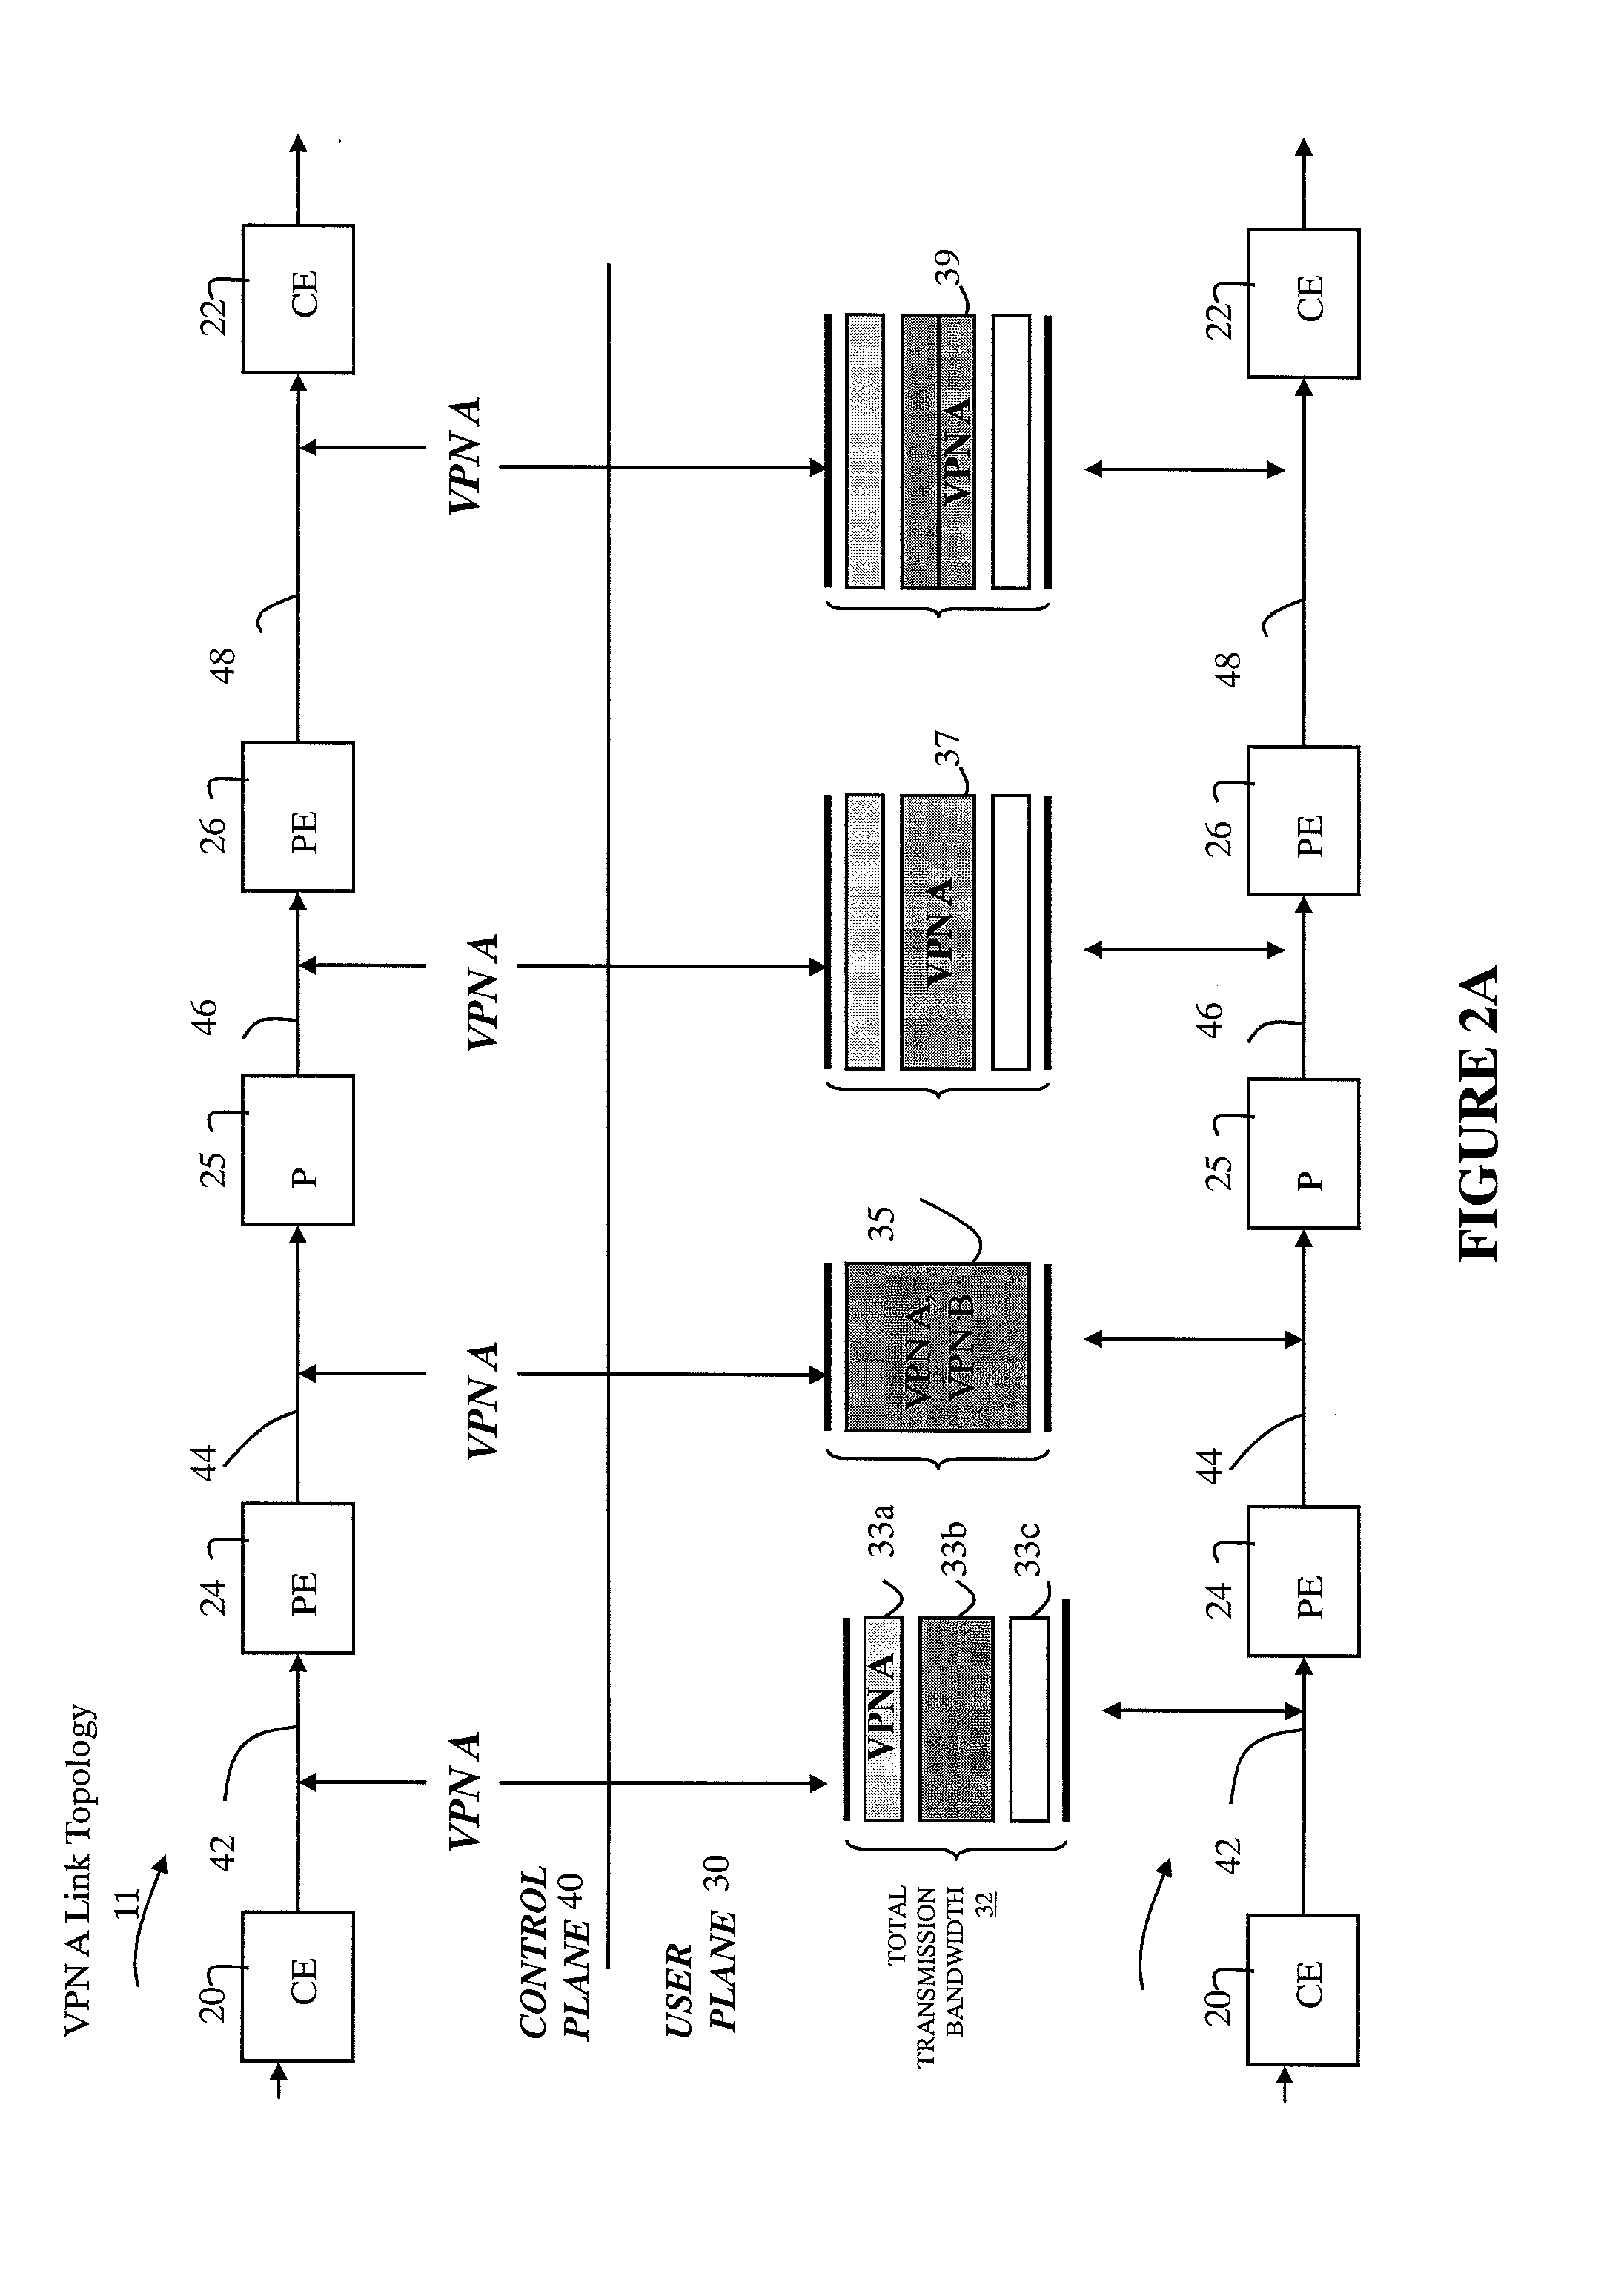 Method and Apparatus for Assigning and Allocating Network Resources to Packet-Based Virtual Private Networks